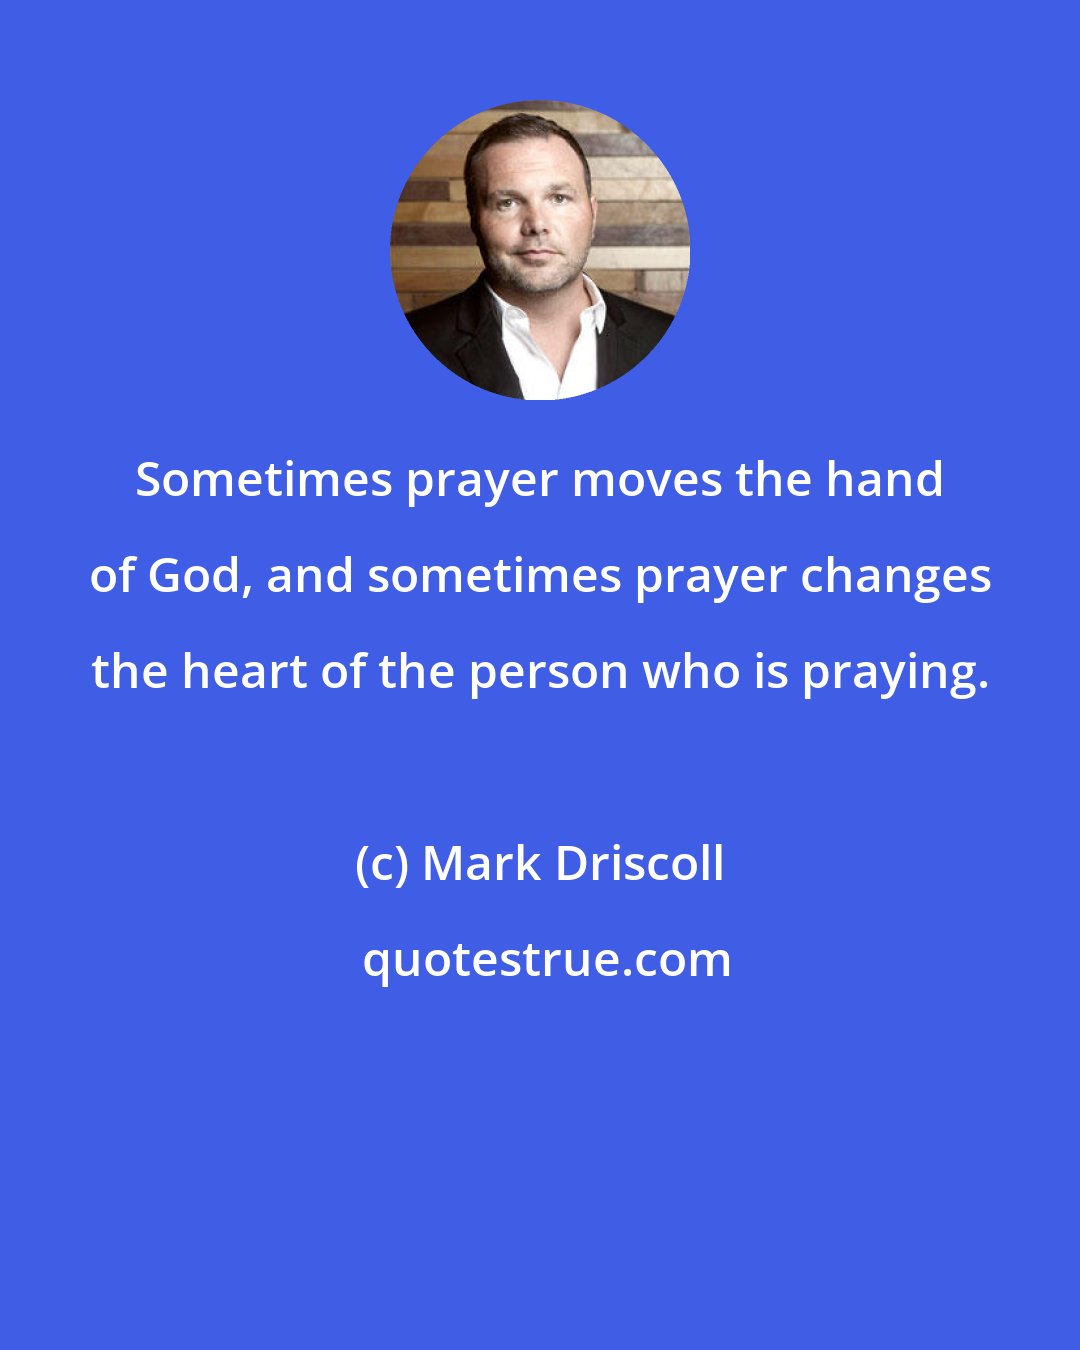 Mark Driscoll: Sometimes prayer moves the hand of God, and sometimes prayer changes the heart of the person who is praying.